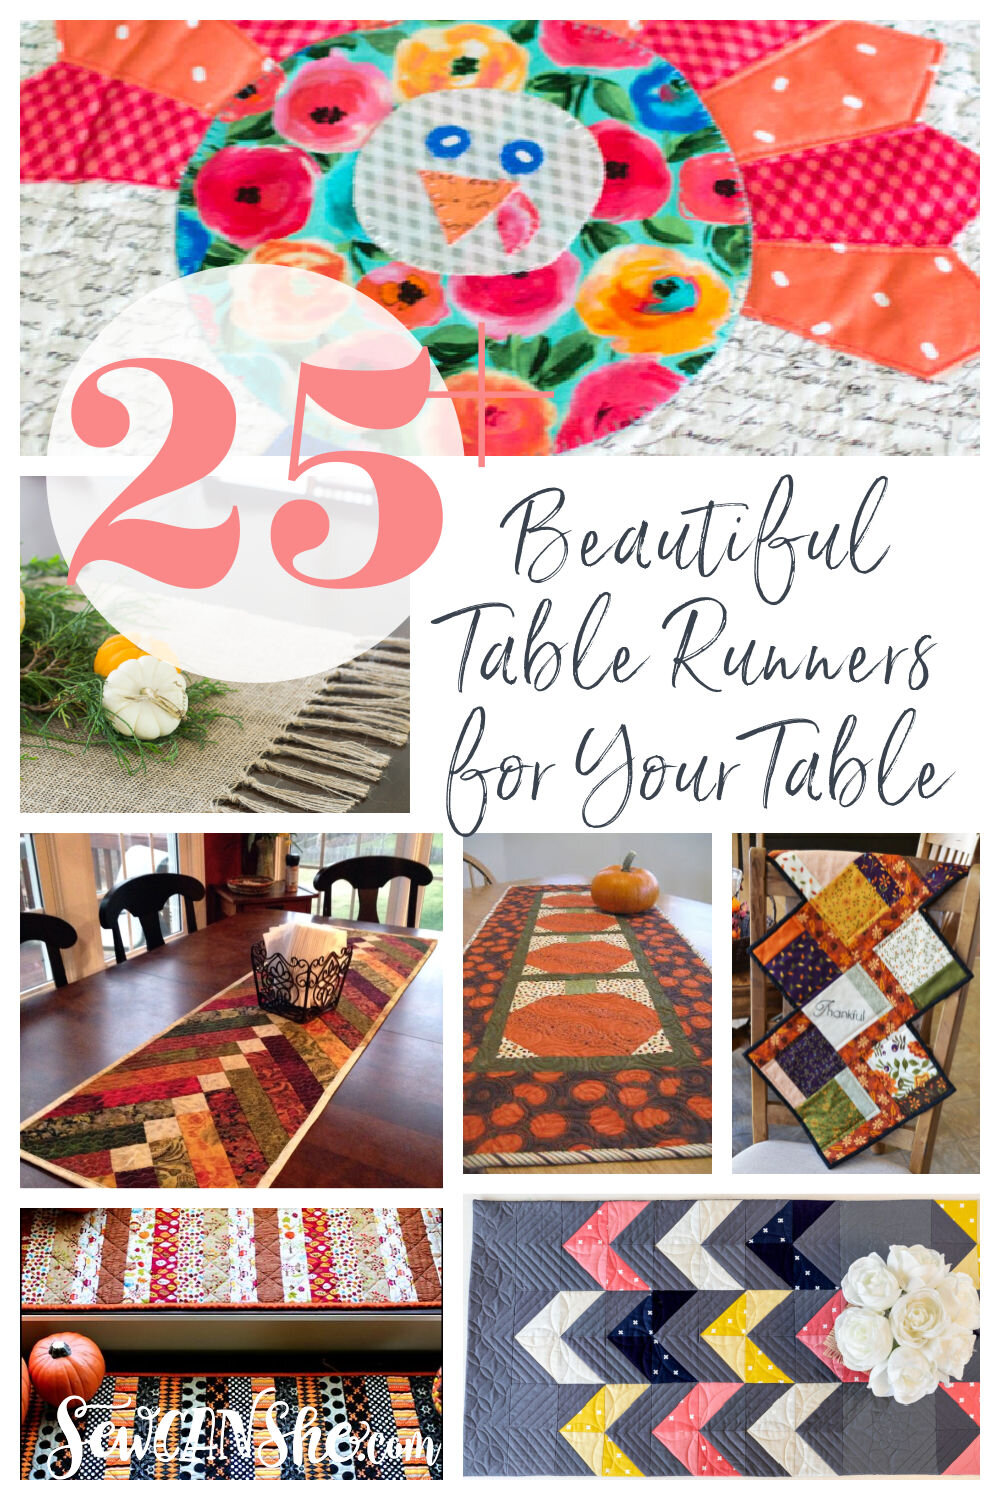 25+ Beautiful Table Runners for Your Table - All Free